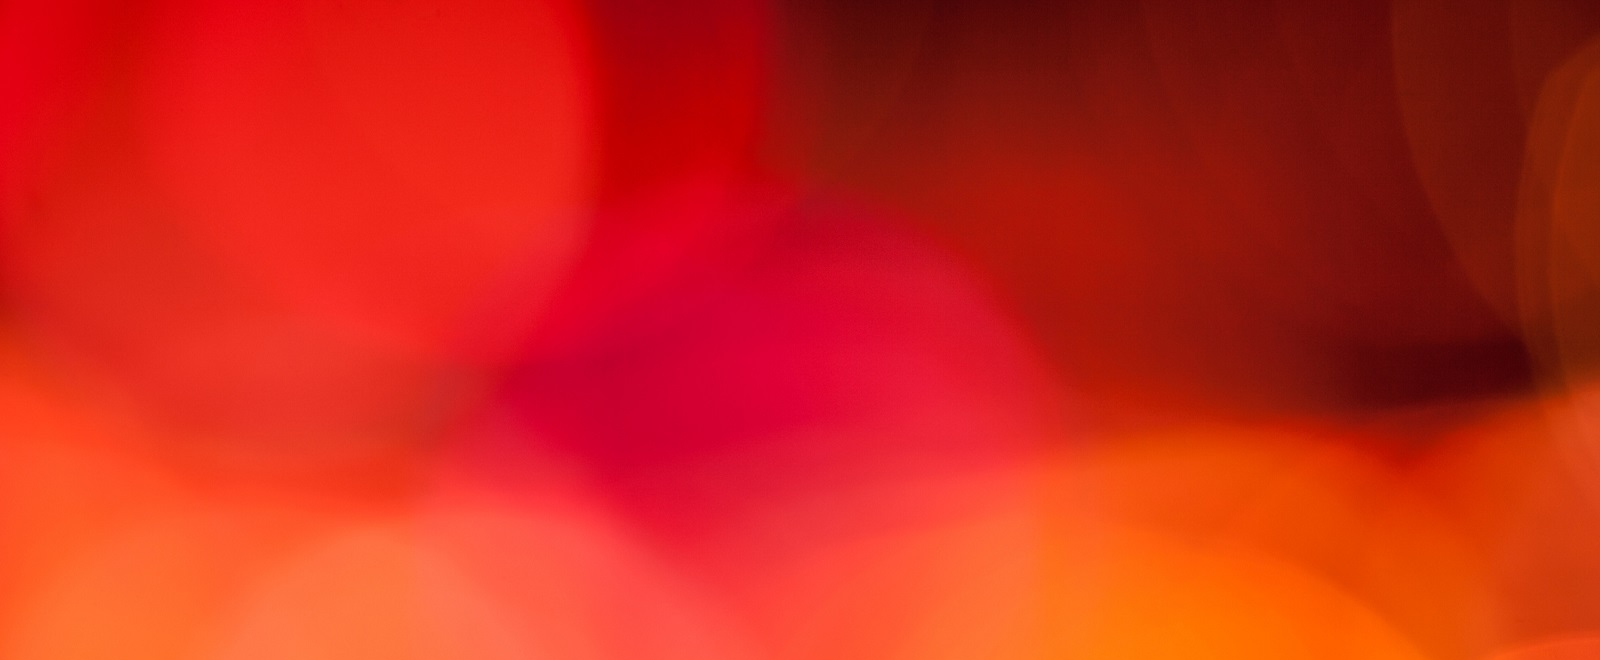 Abstract Defocused Orange And Red Circular Light Pattern